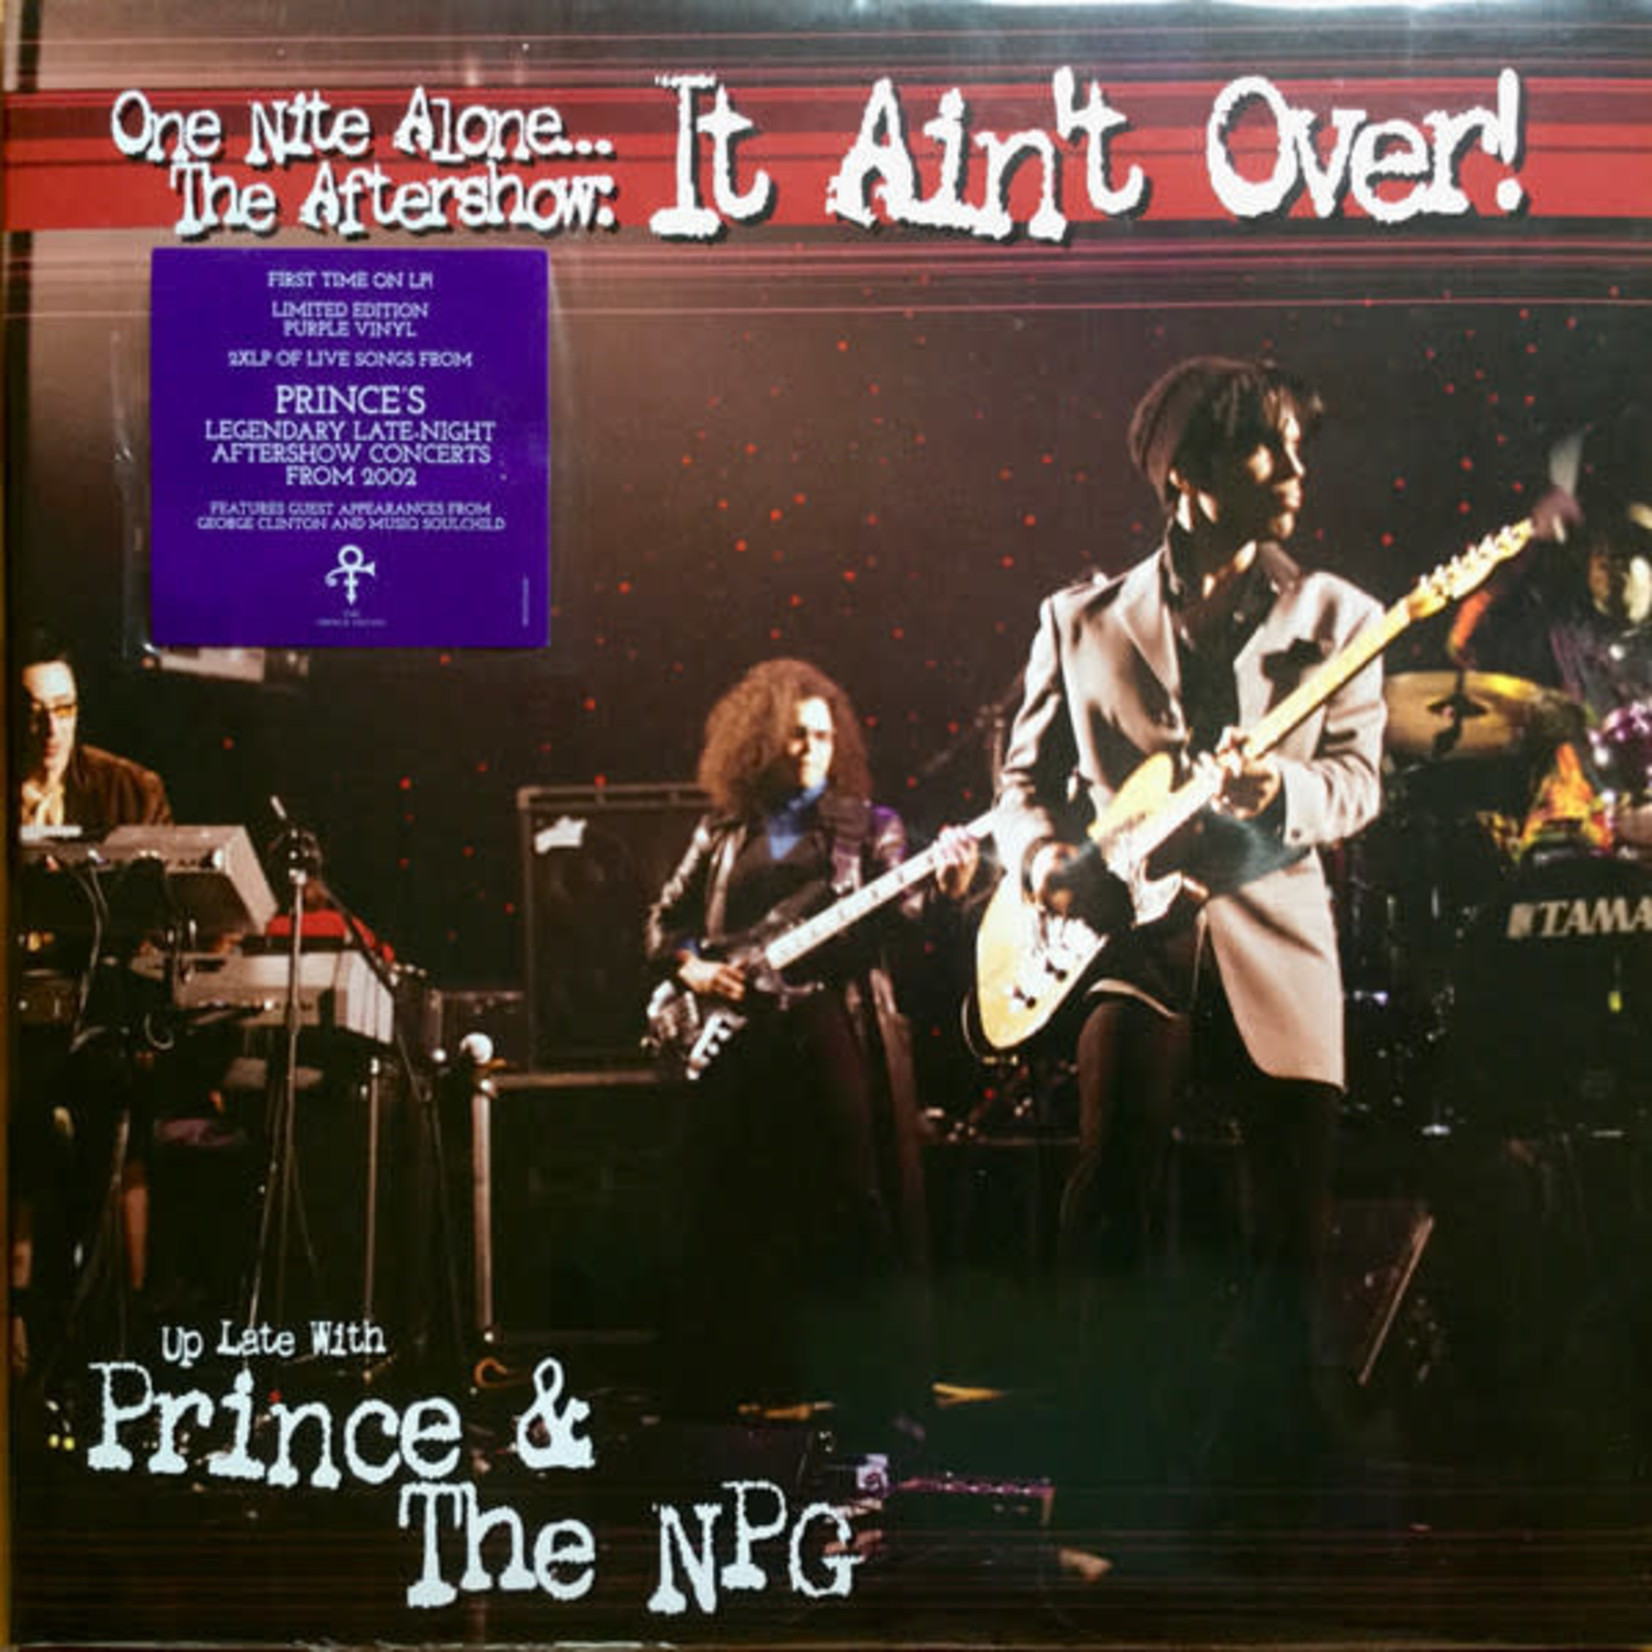 Legacy Prince & The New Power Generation - One Nite Alone... The Aftershow: It Ain't Over (2LP) [Purple]